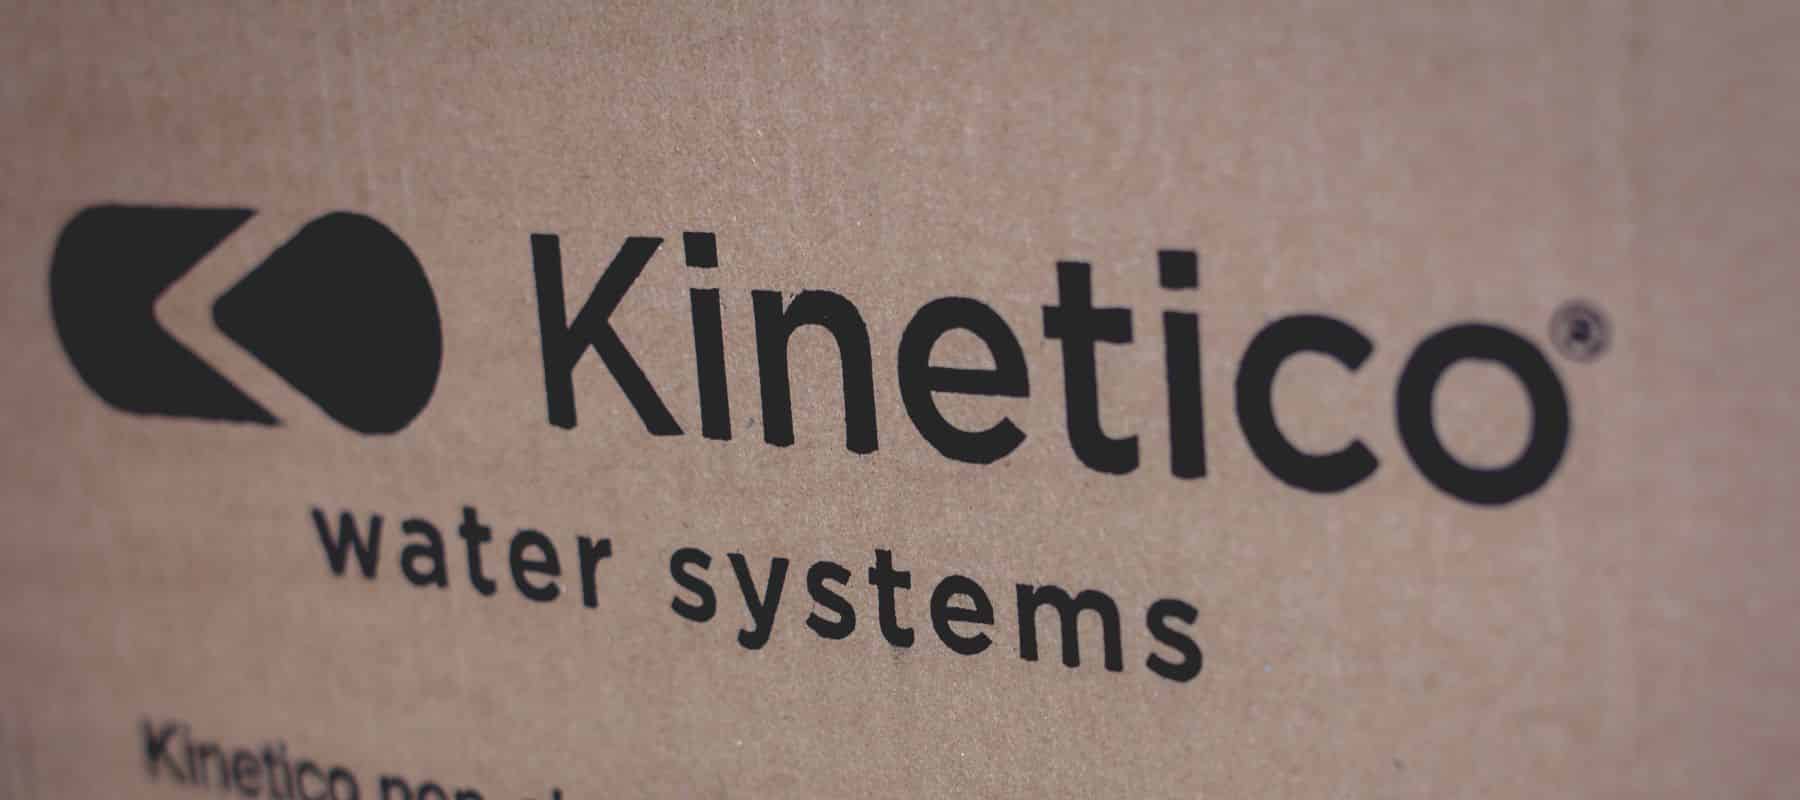 Kinetico water systems box